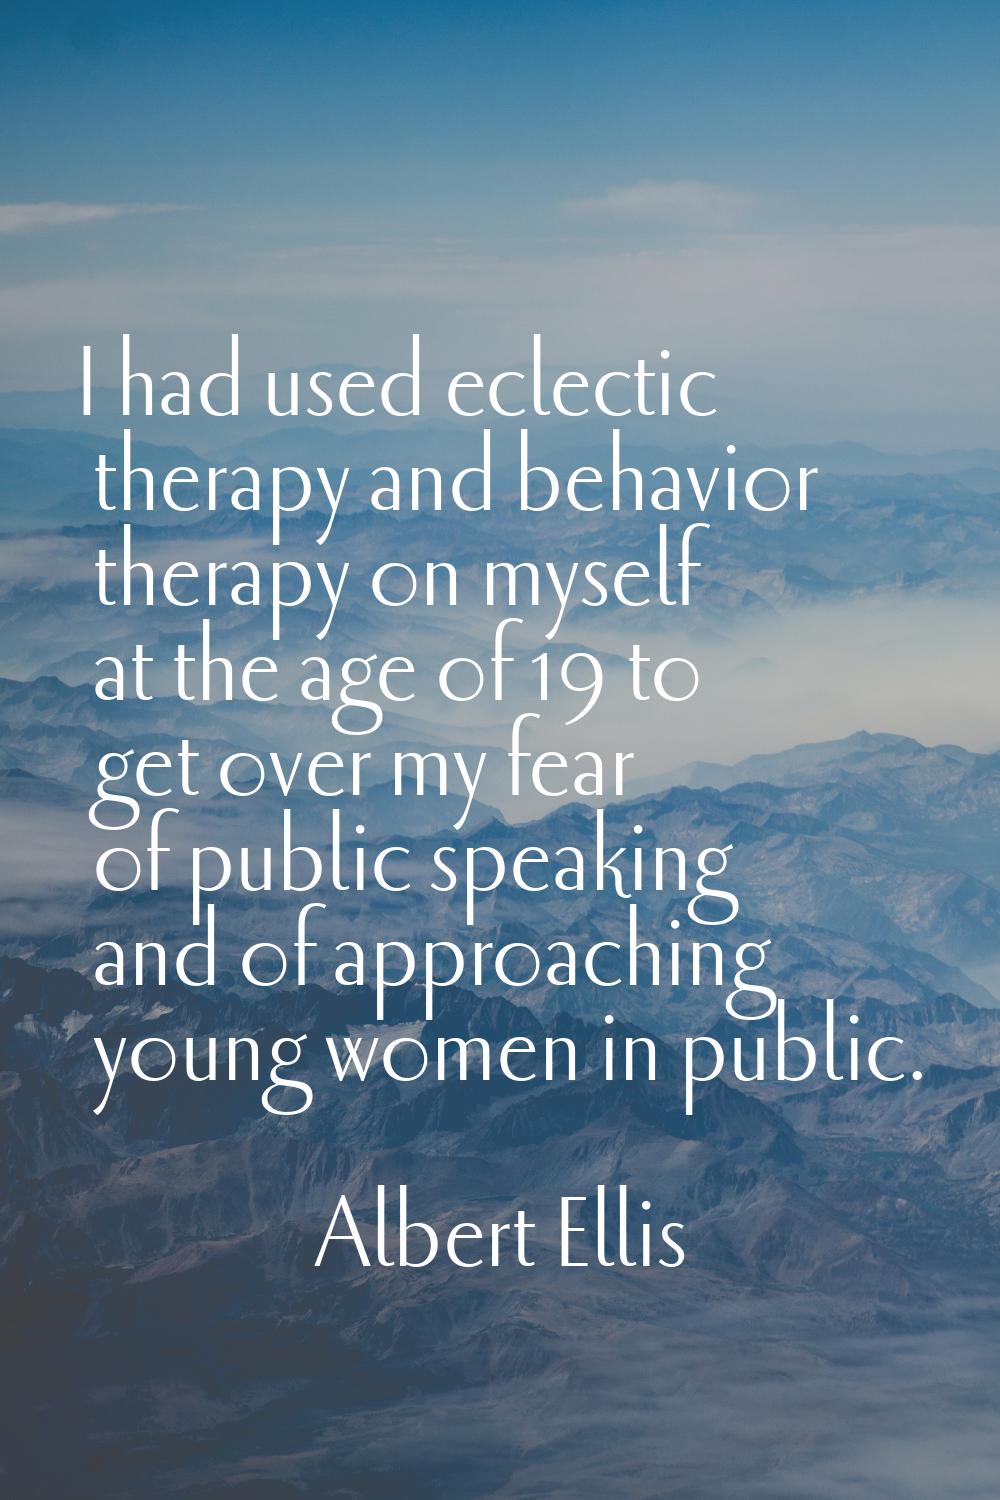 I had used eclectic therapy and behavior therapy on myself at the age of 19 to get over my fear of 